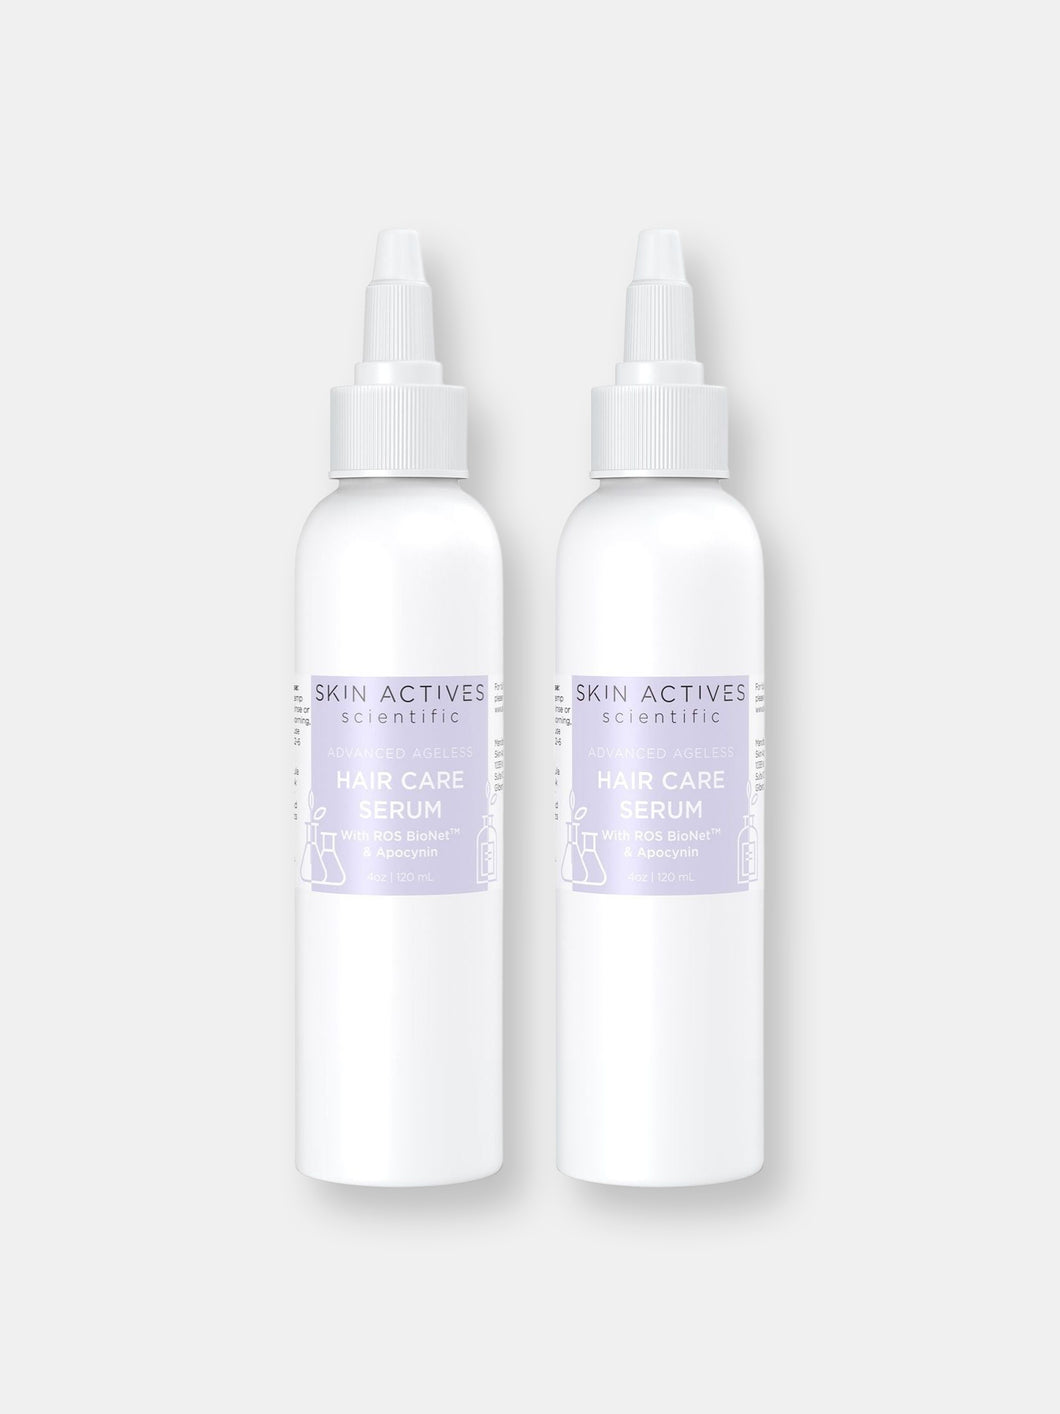 Hair Care Serum with ROS BioNet and Apocynin | Advanced Ageless Collection - 2-Pack